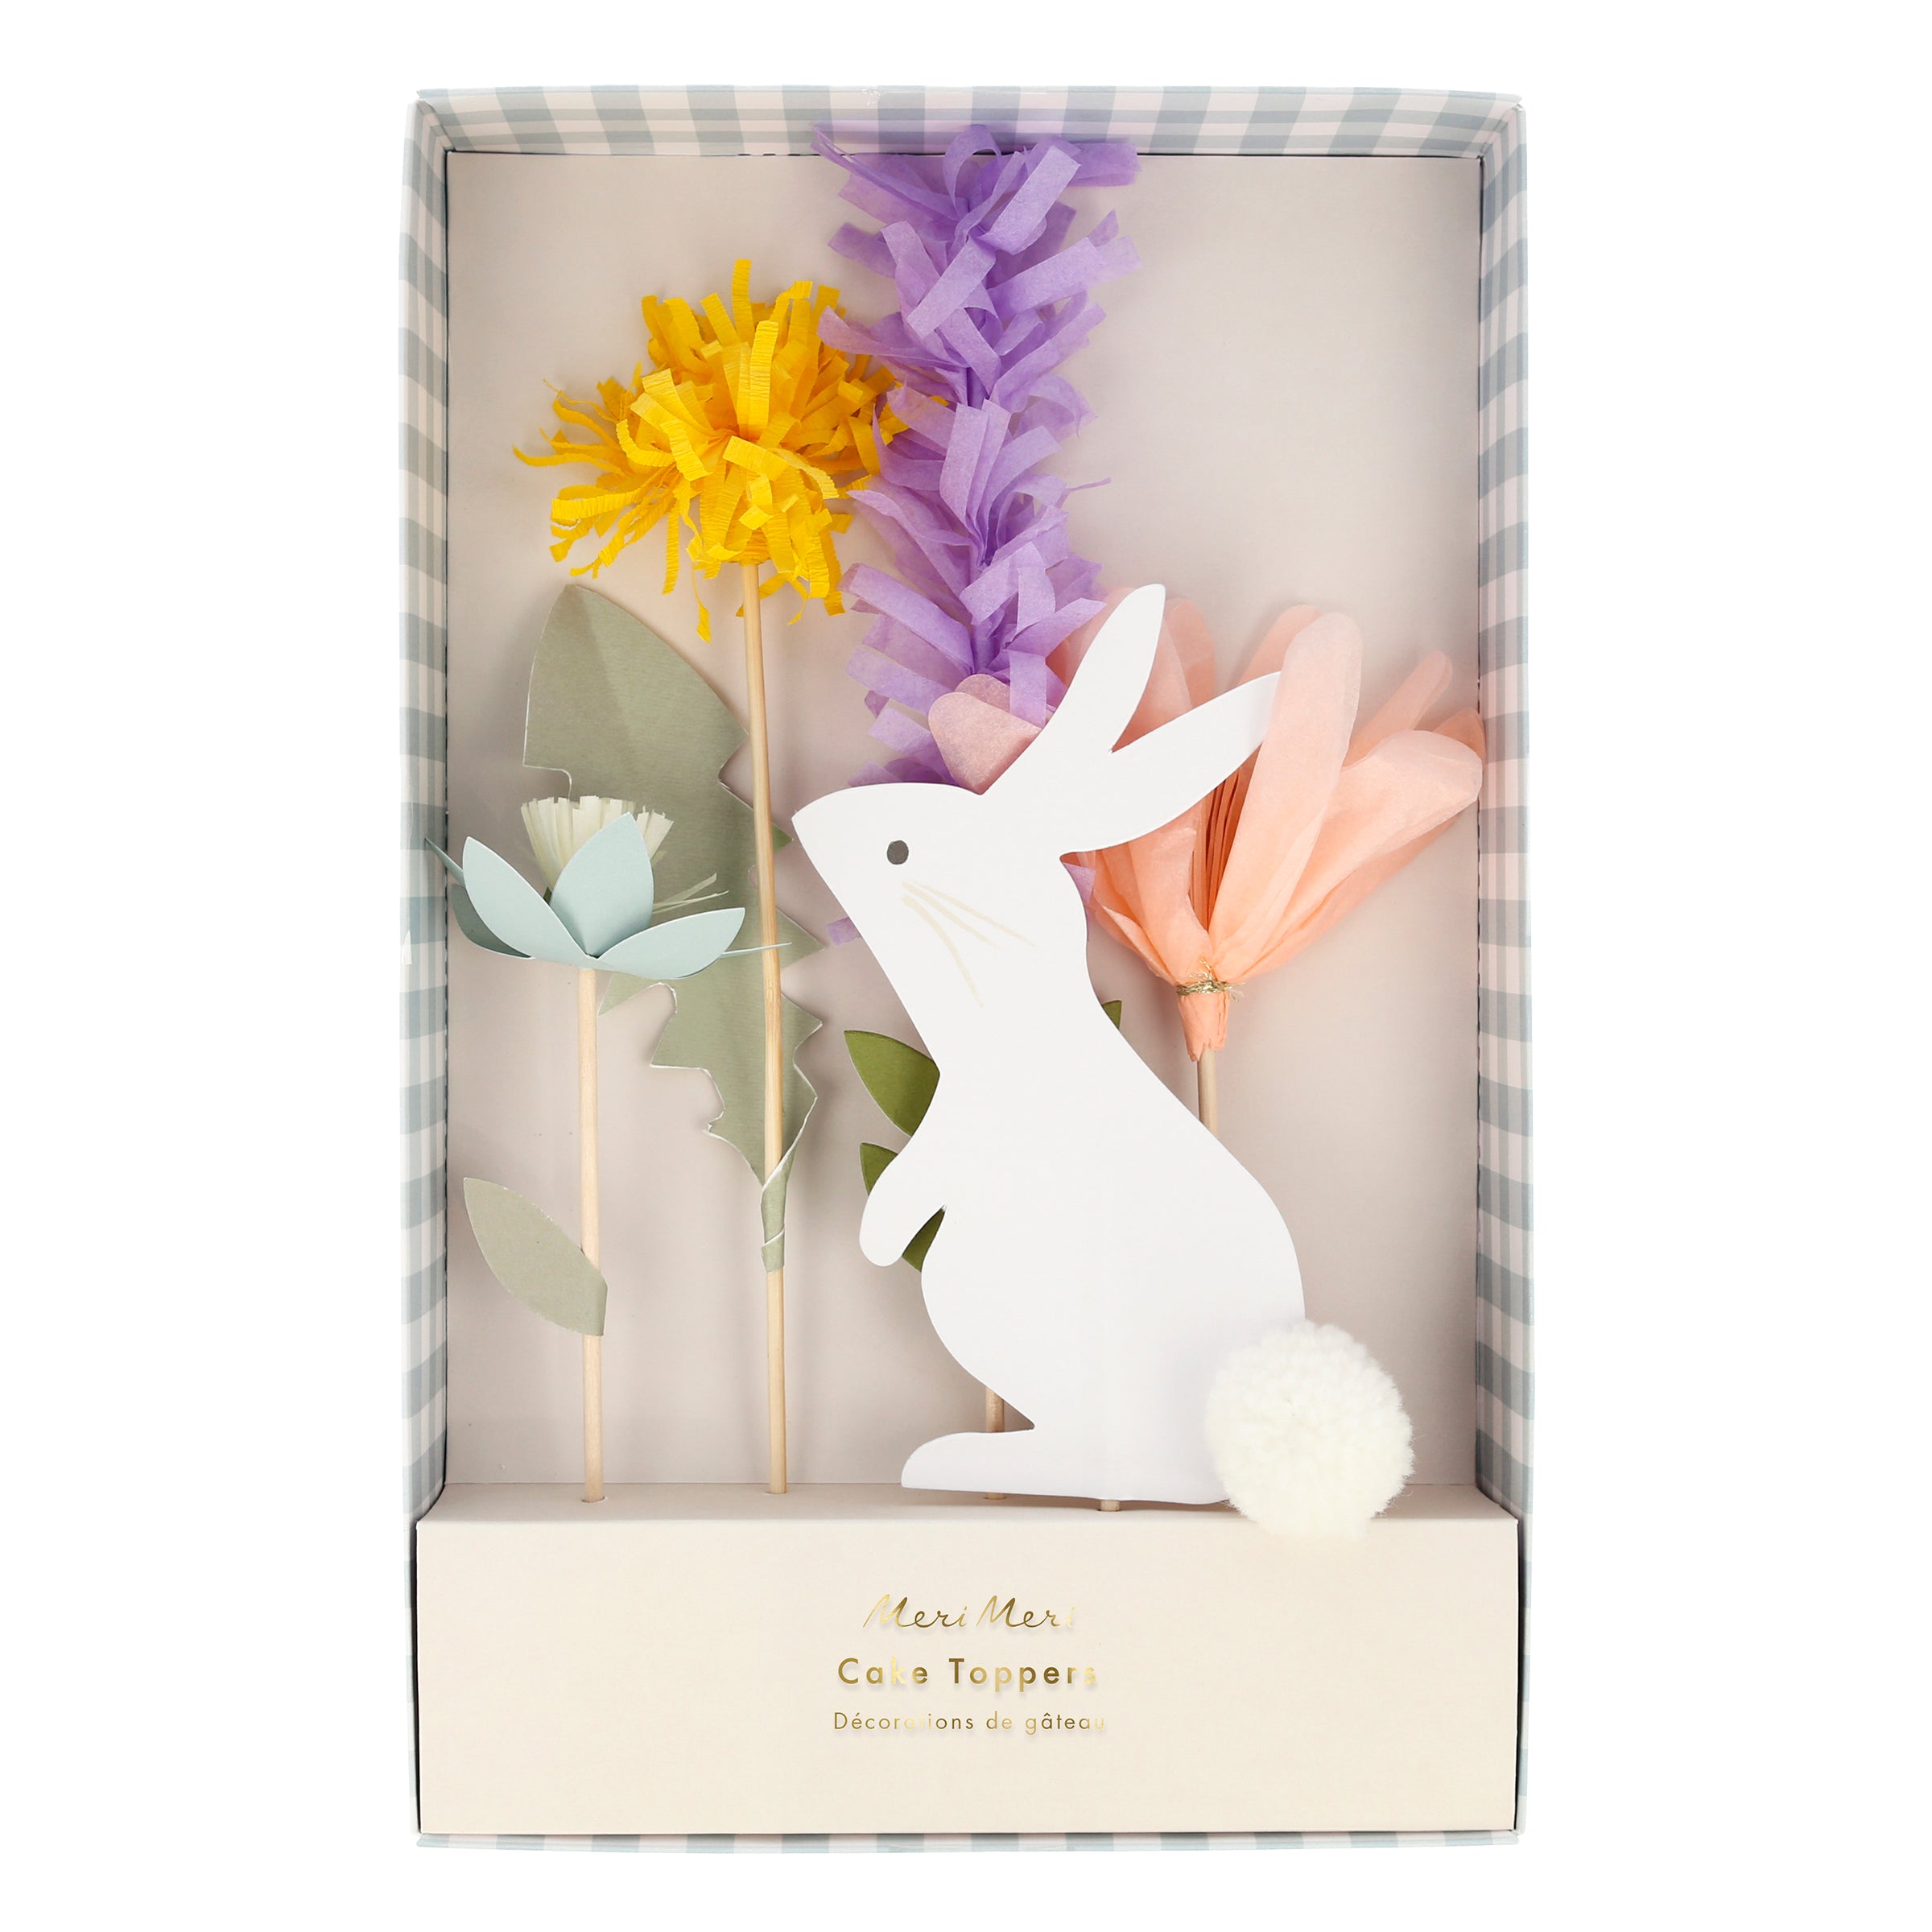 Our bunny cake topper has a delightful pompom tail, and teamed with flower cake toppers, this set will make your Easter cake look amazing.